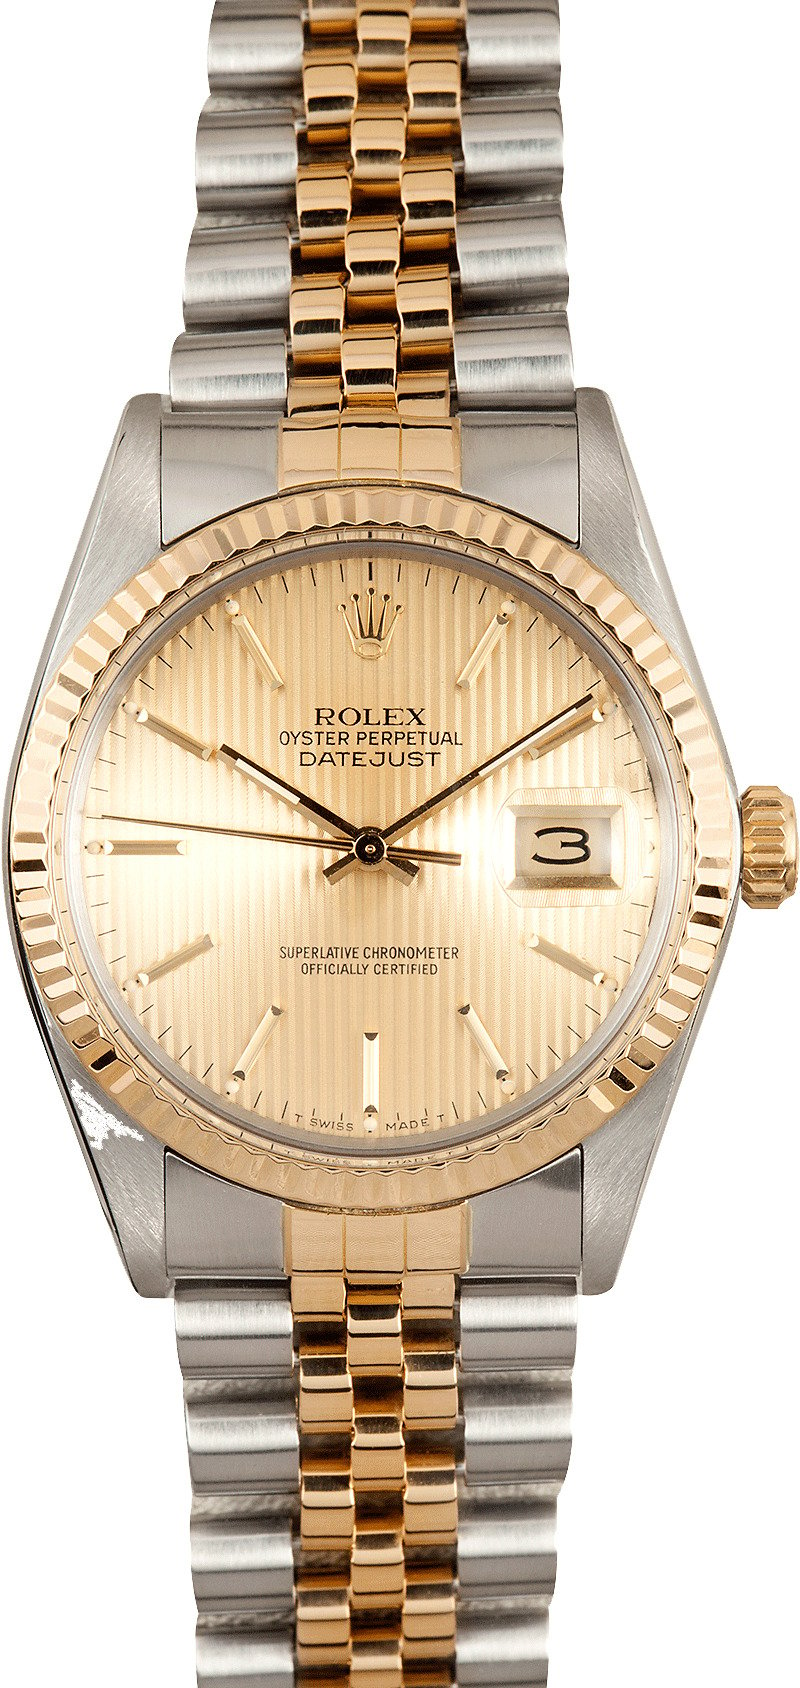 Rolex Oyster Perpetual DateJust 